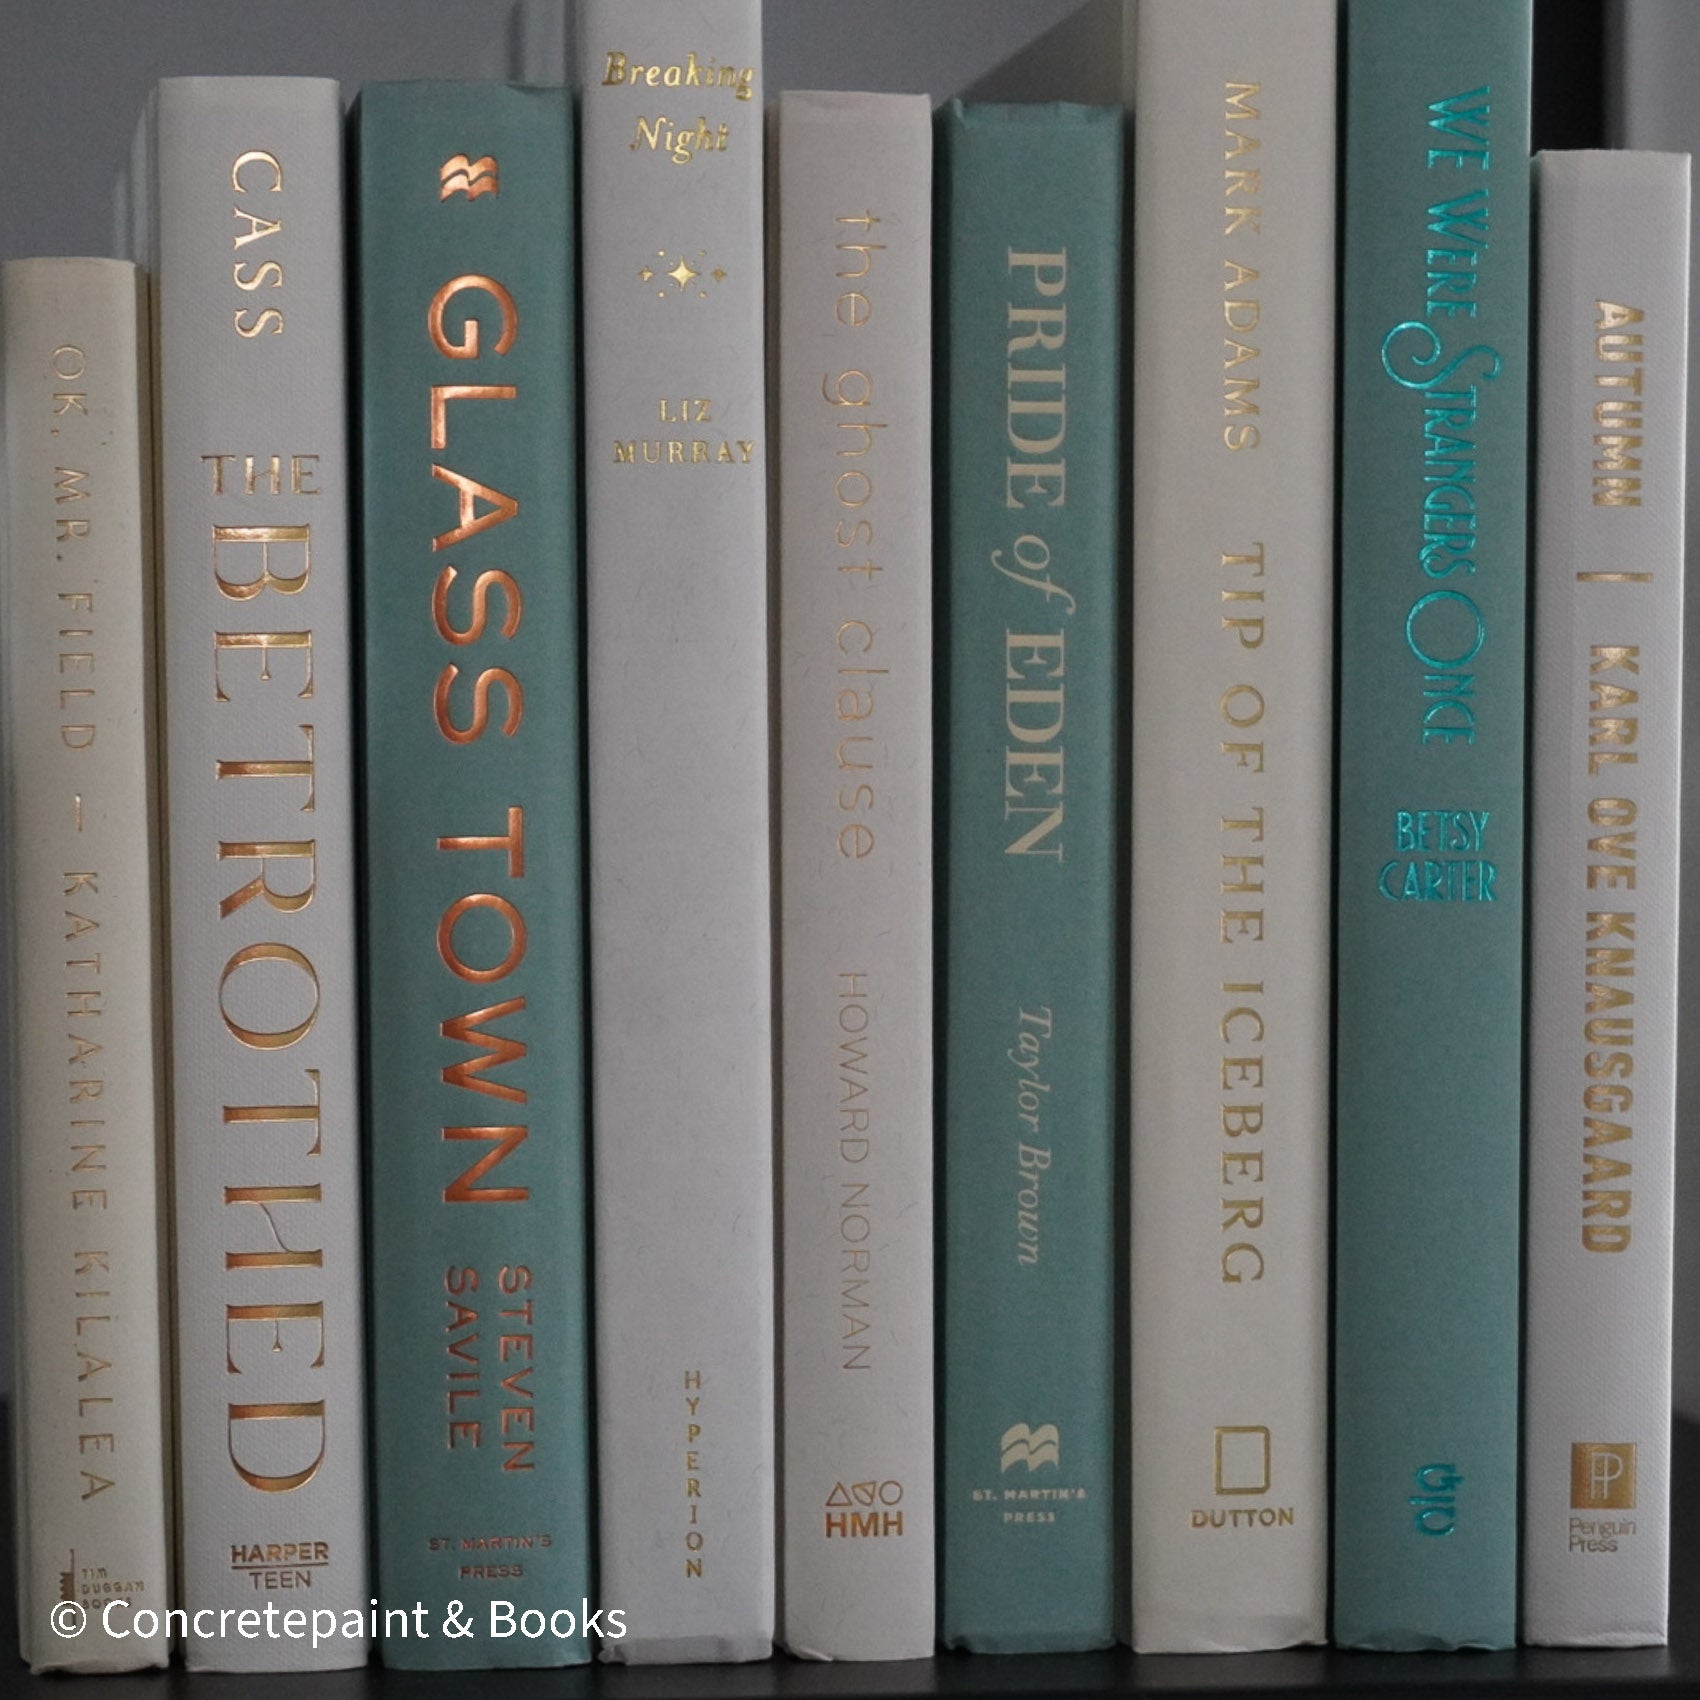 White & Misty Mint Book Display 9